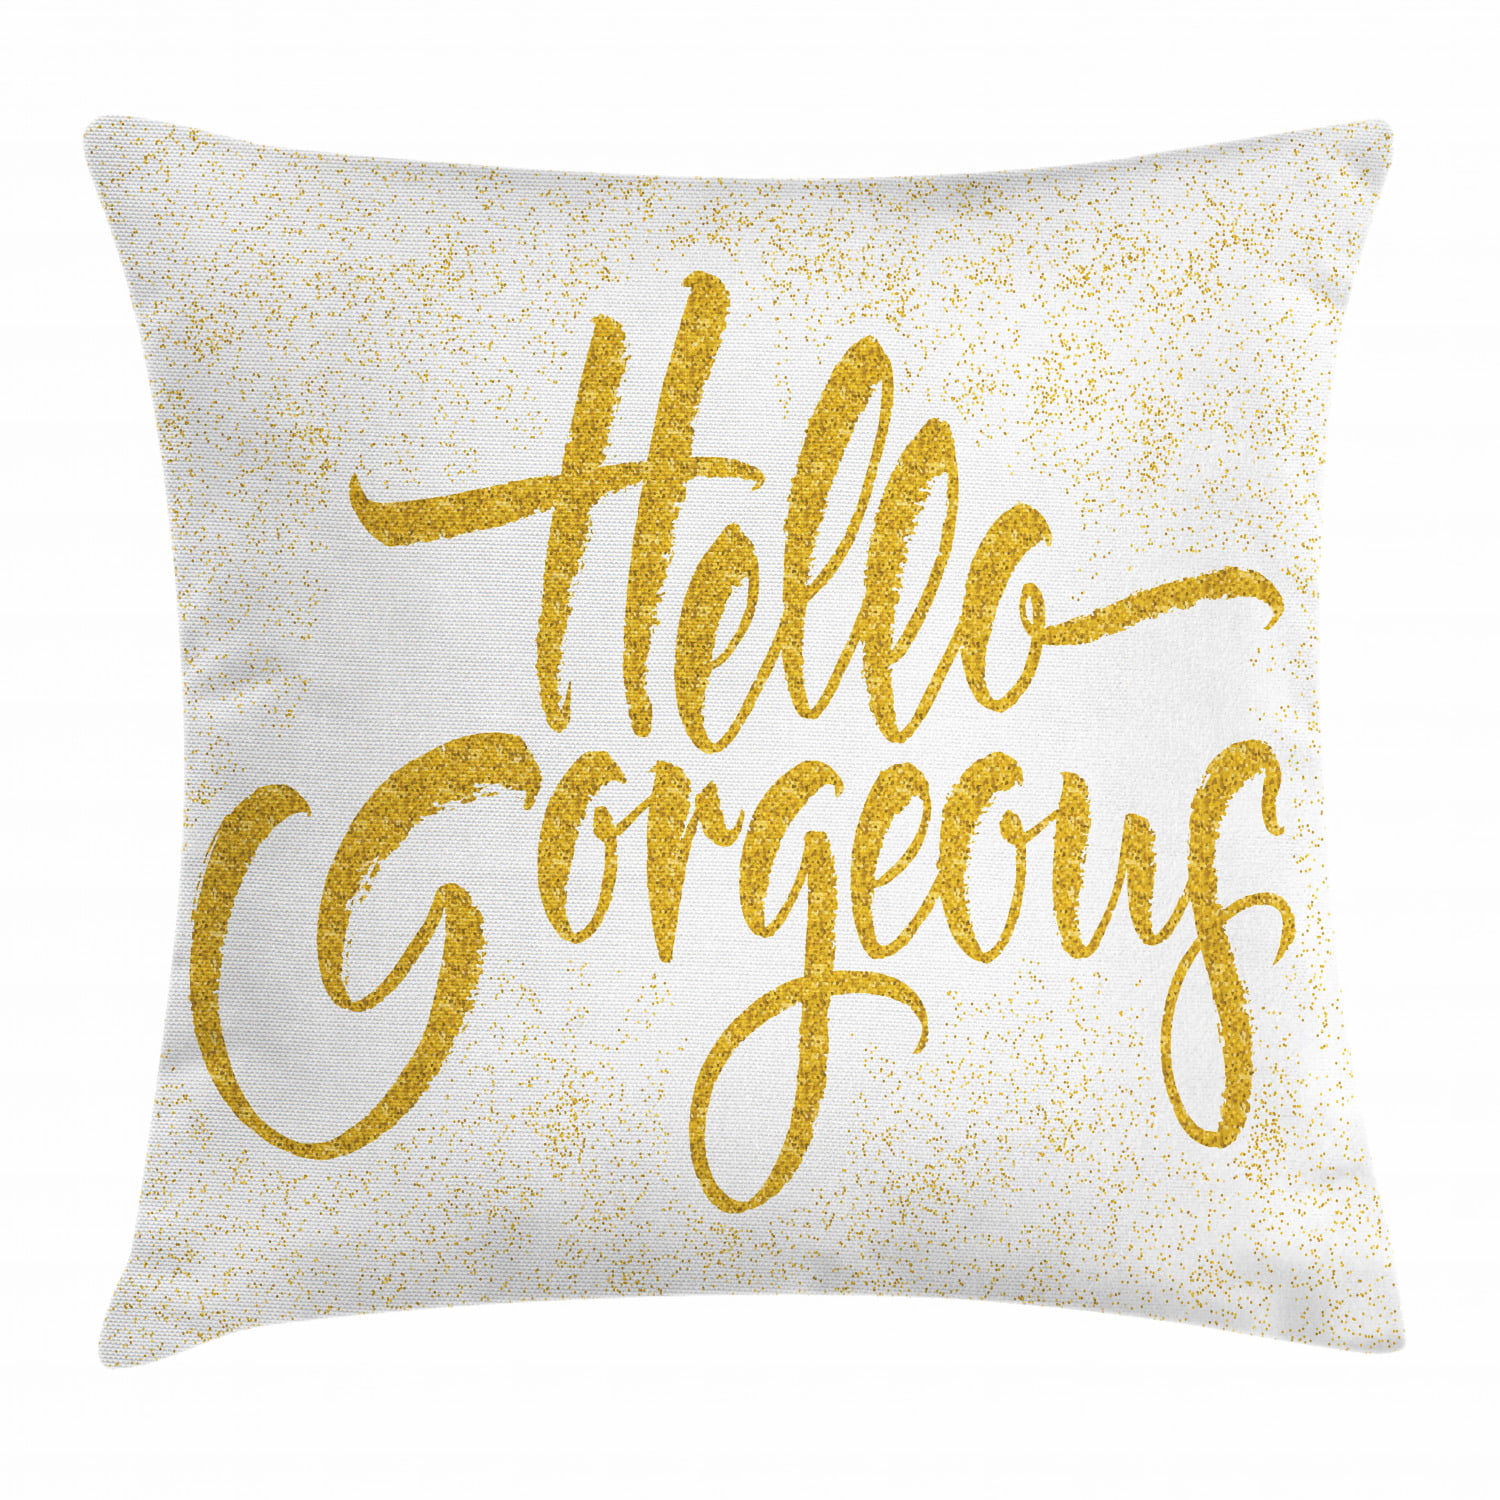 White Charcoal Ambesonne Hello Throw Pillow Cushion Cover Decorative Square Accent Pillow Case Brush Lettering Designed Calligraphy Print of Hello on Colorful Floral Background 20 X 20 